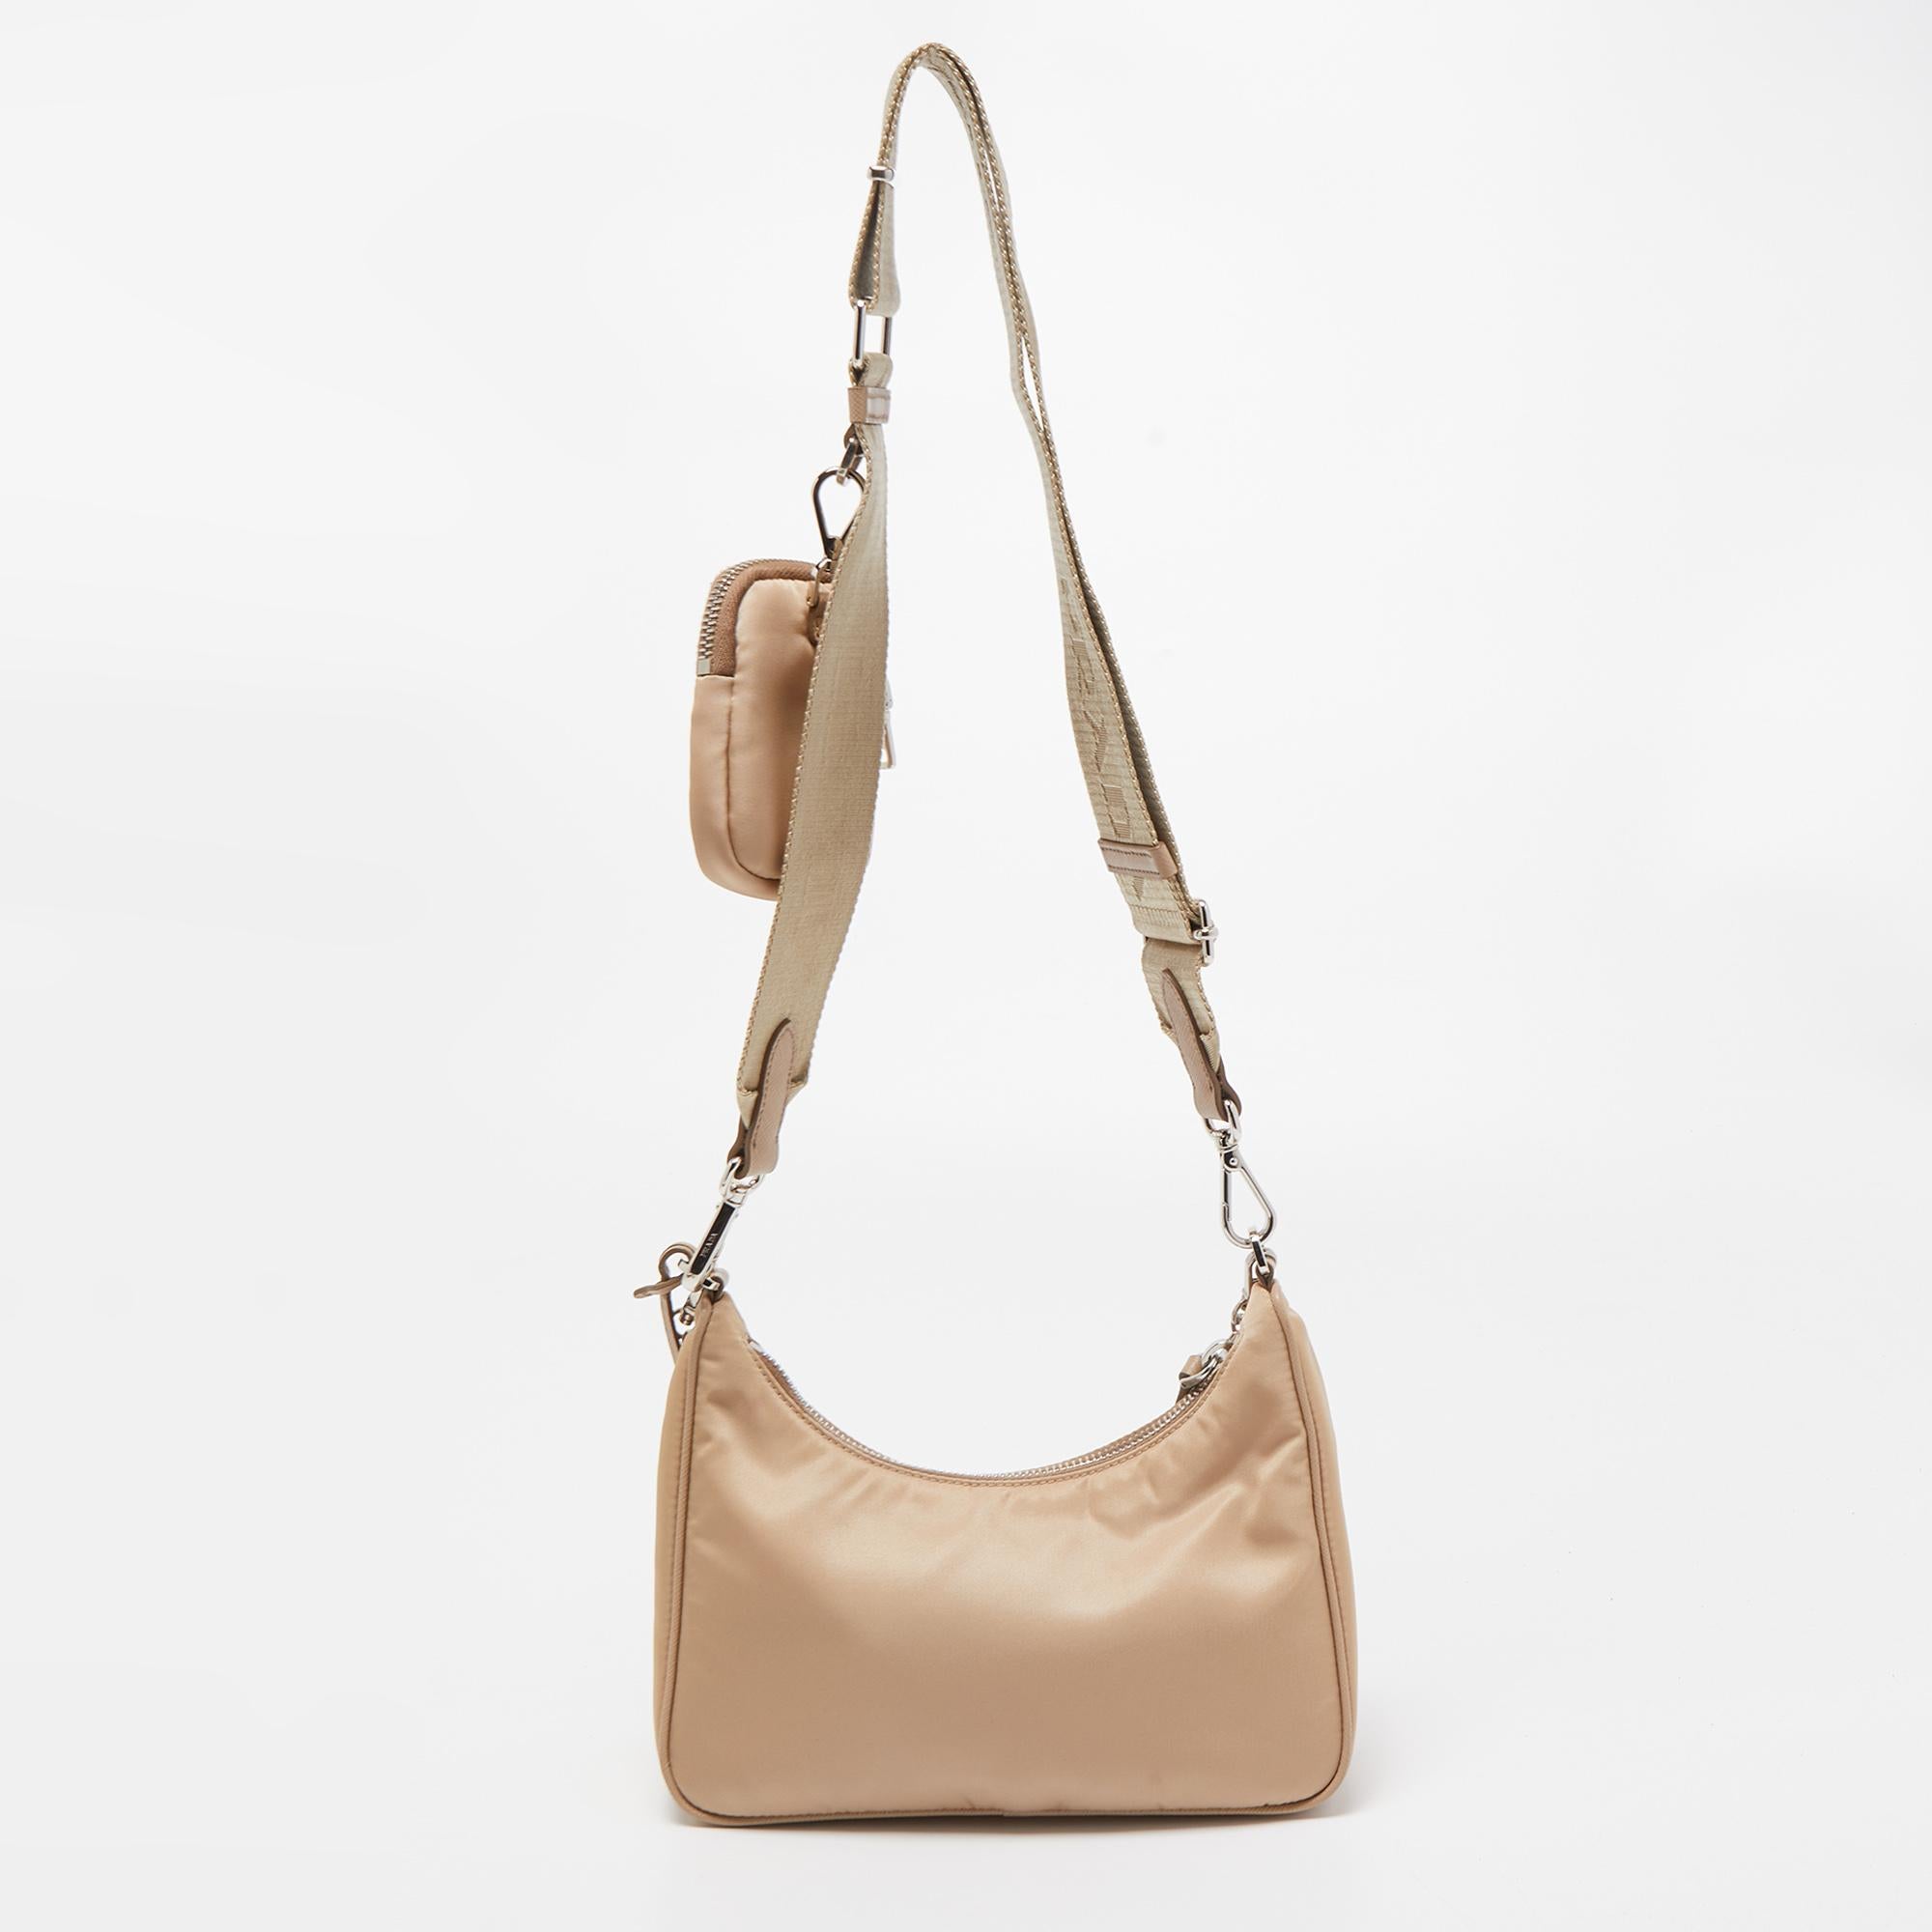 The petite silhouette and classic elements made the Prada Re-Edition 2005 bag an instant hit among fashionistas. Inspired by the classic mini hobo bag, this beige creation comes made from nylon and features a single handle at the top. The perfectly